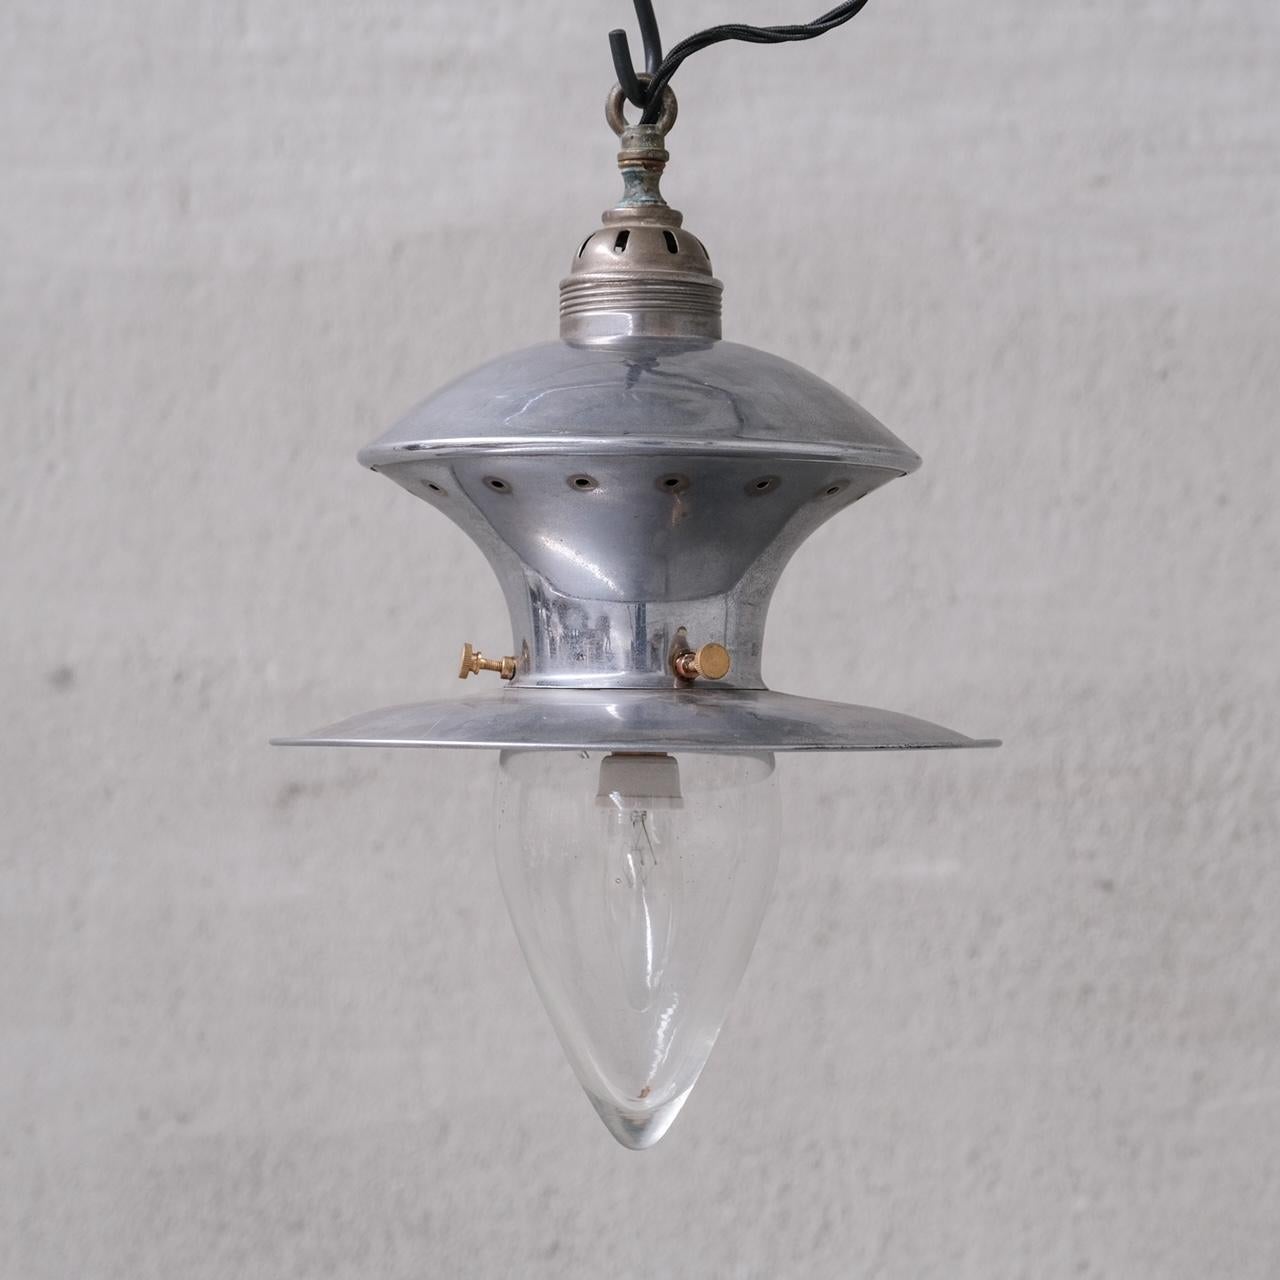 A pair of nickel plated brass and glass pendant lights.

France, c1950s.

Industrial chic.

Price is for the pair.

No rose was retained or chain, however they are easy to source online.

Good vintage condtion, re-wired and PAT tested.

Location: